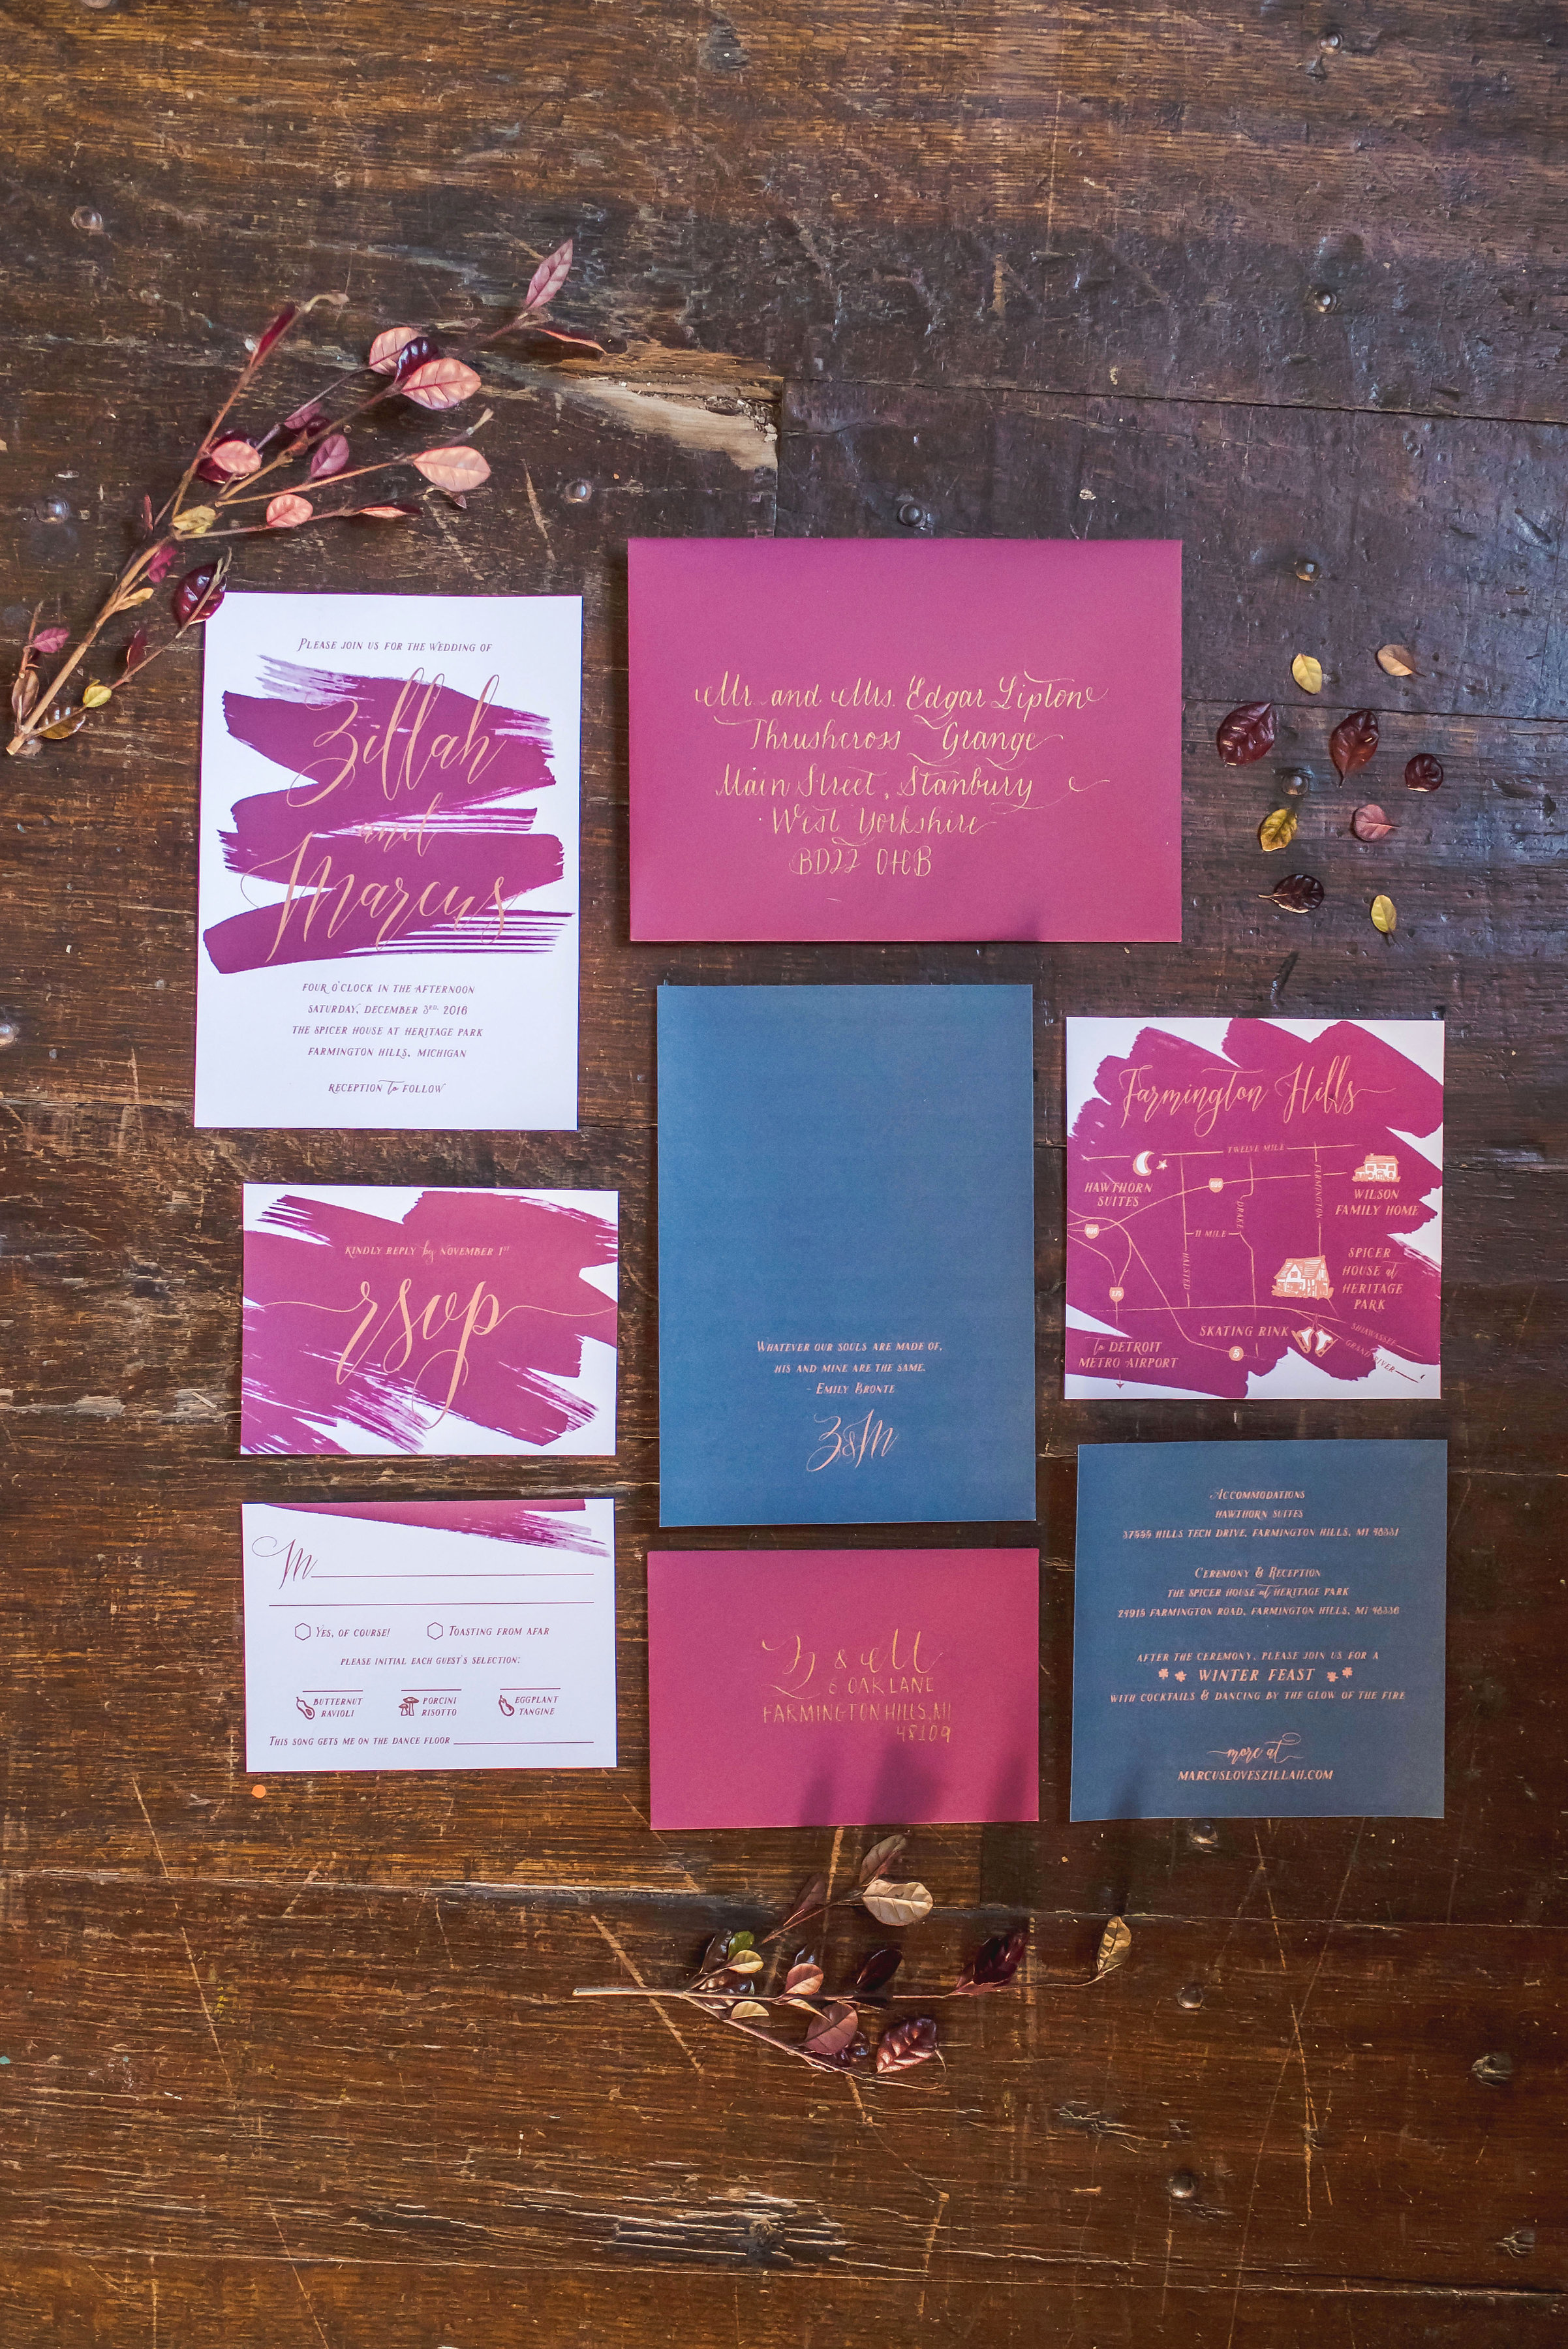 Calligraphy by  M.B. Calligraphy , Invitation Suite by  Alisa Bobzien , Photo by  E Schmidt Photography